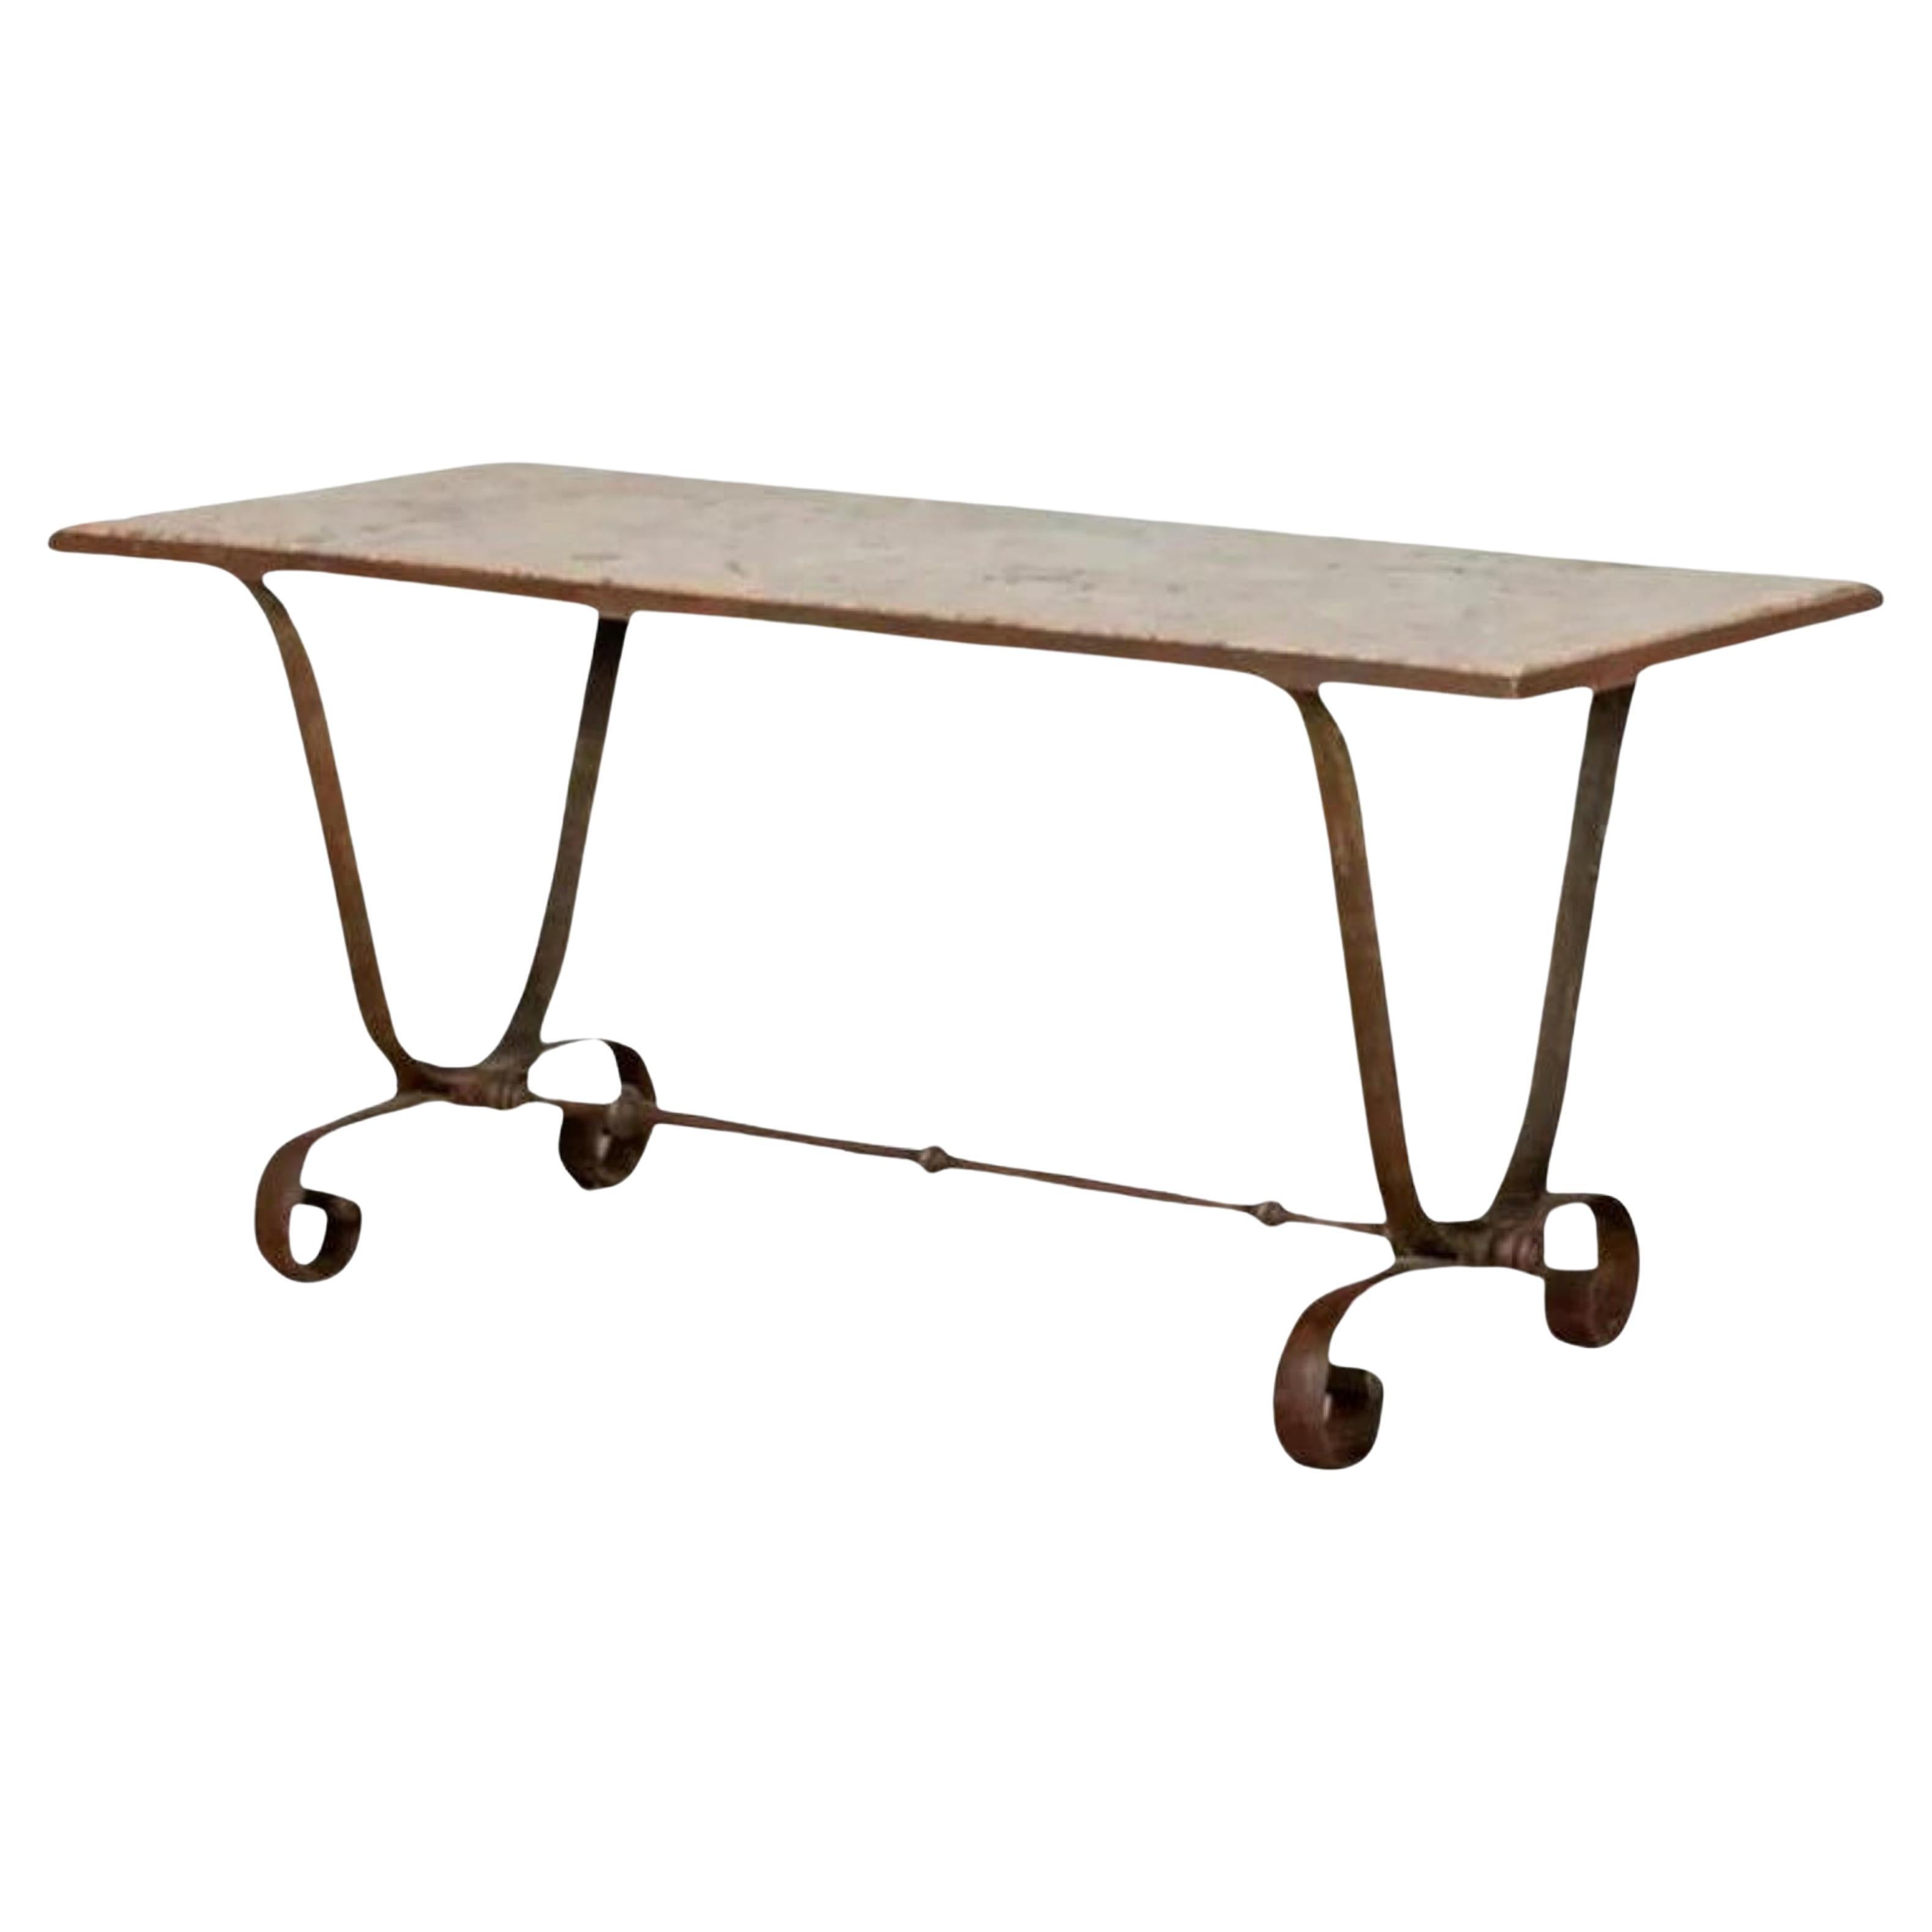 Italian Iron and Marble Table, 20th Century For Sale